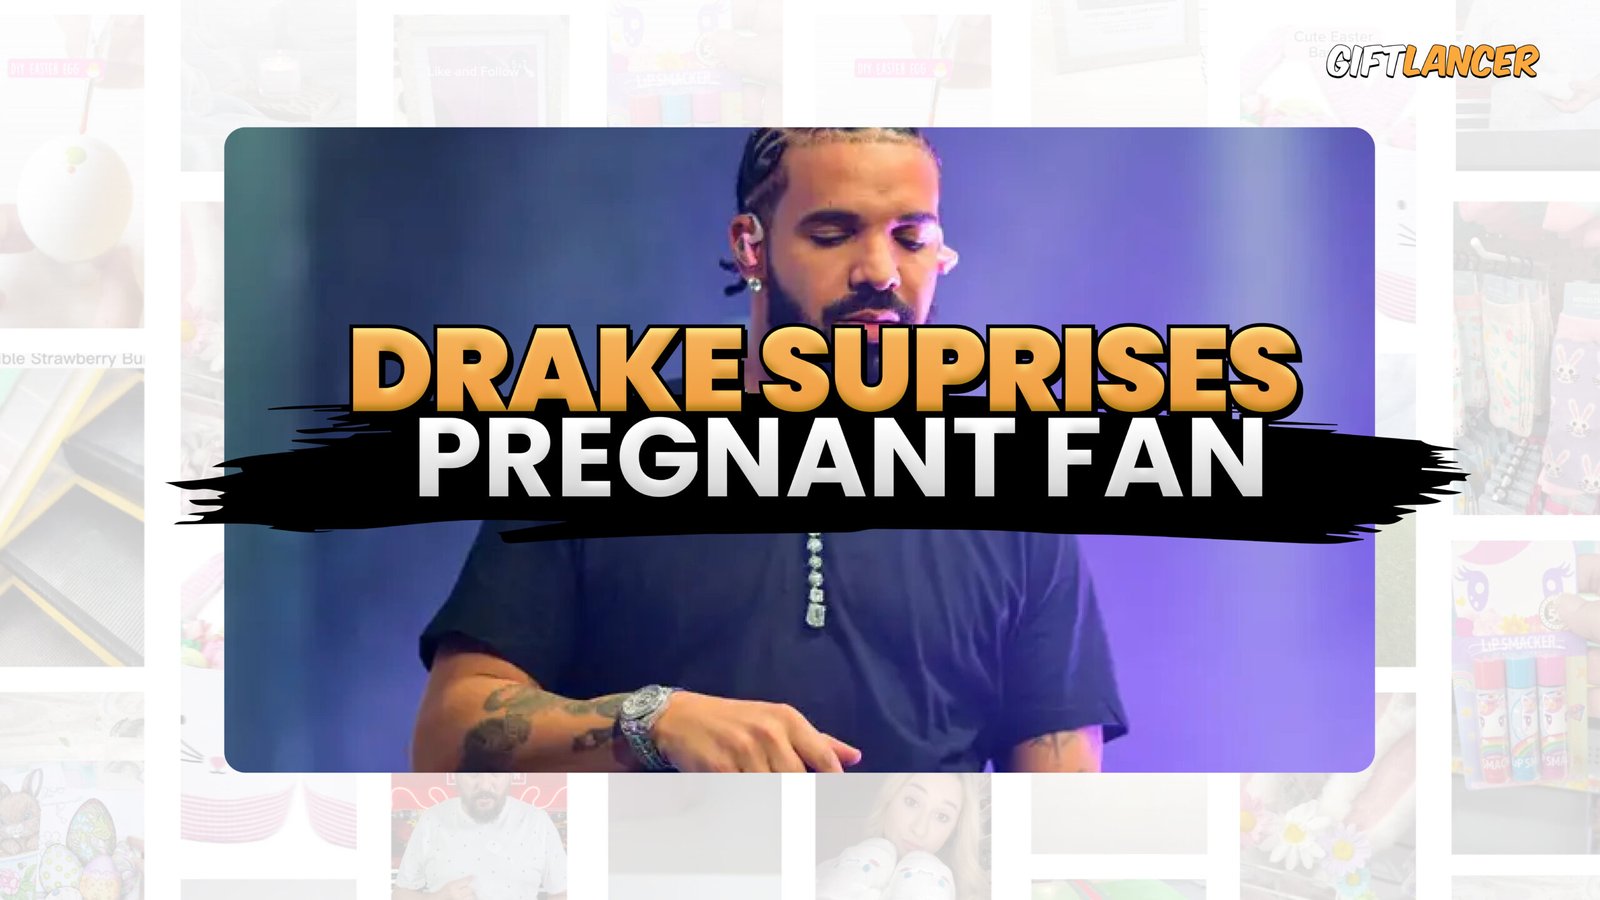 Drake Surprises Pregnant Fan with $25,000 Gift